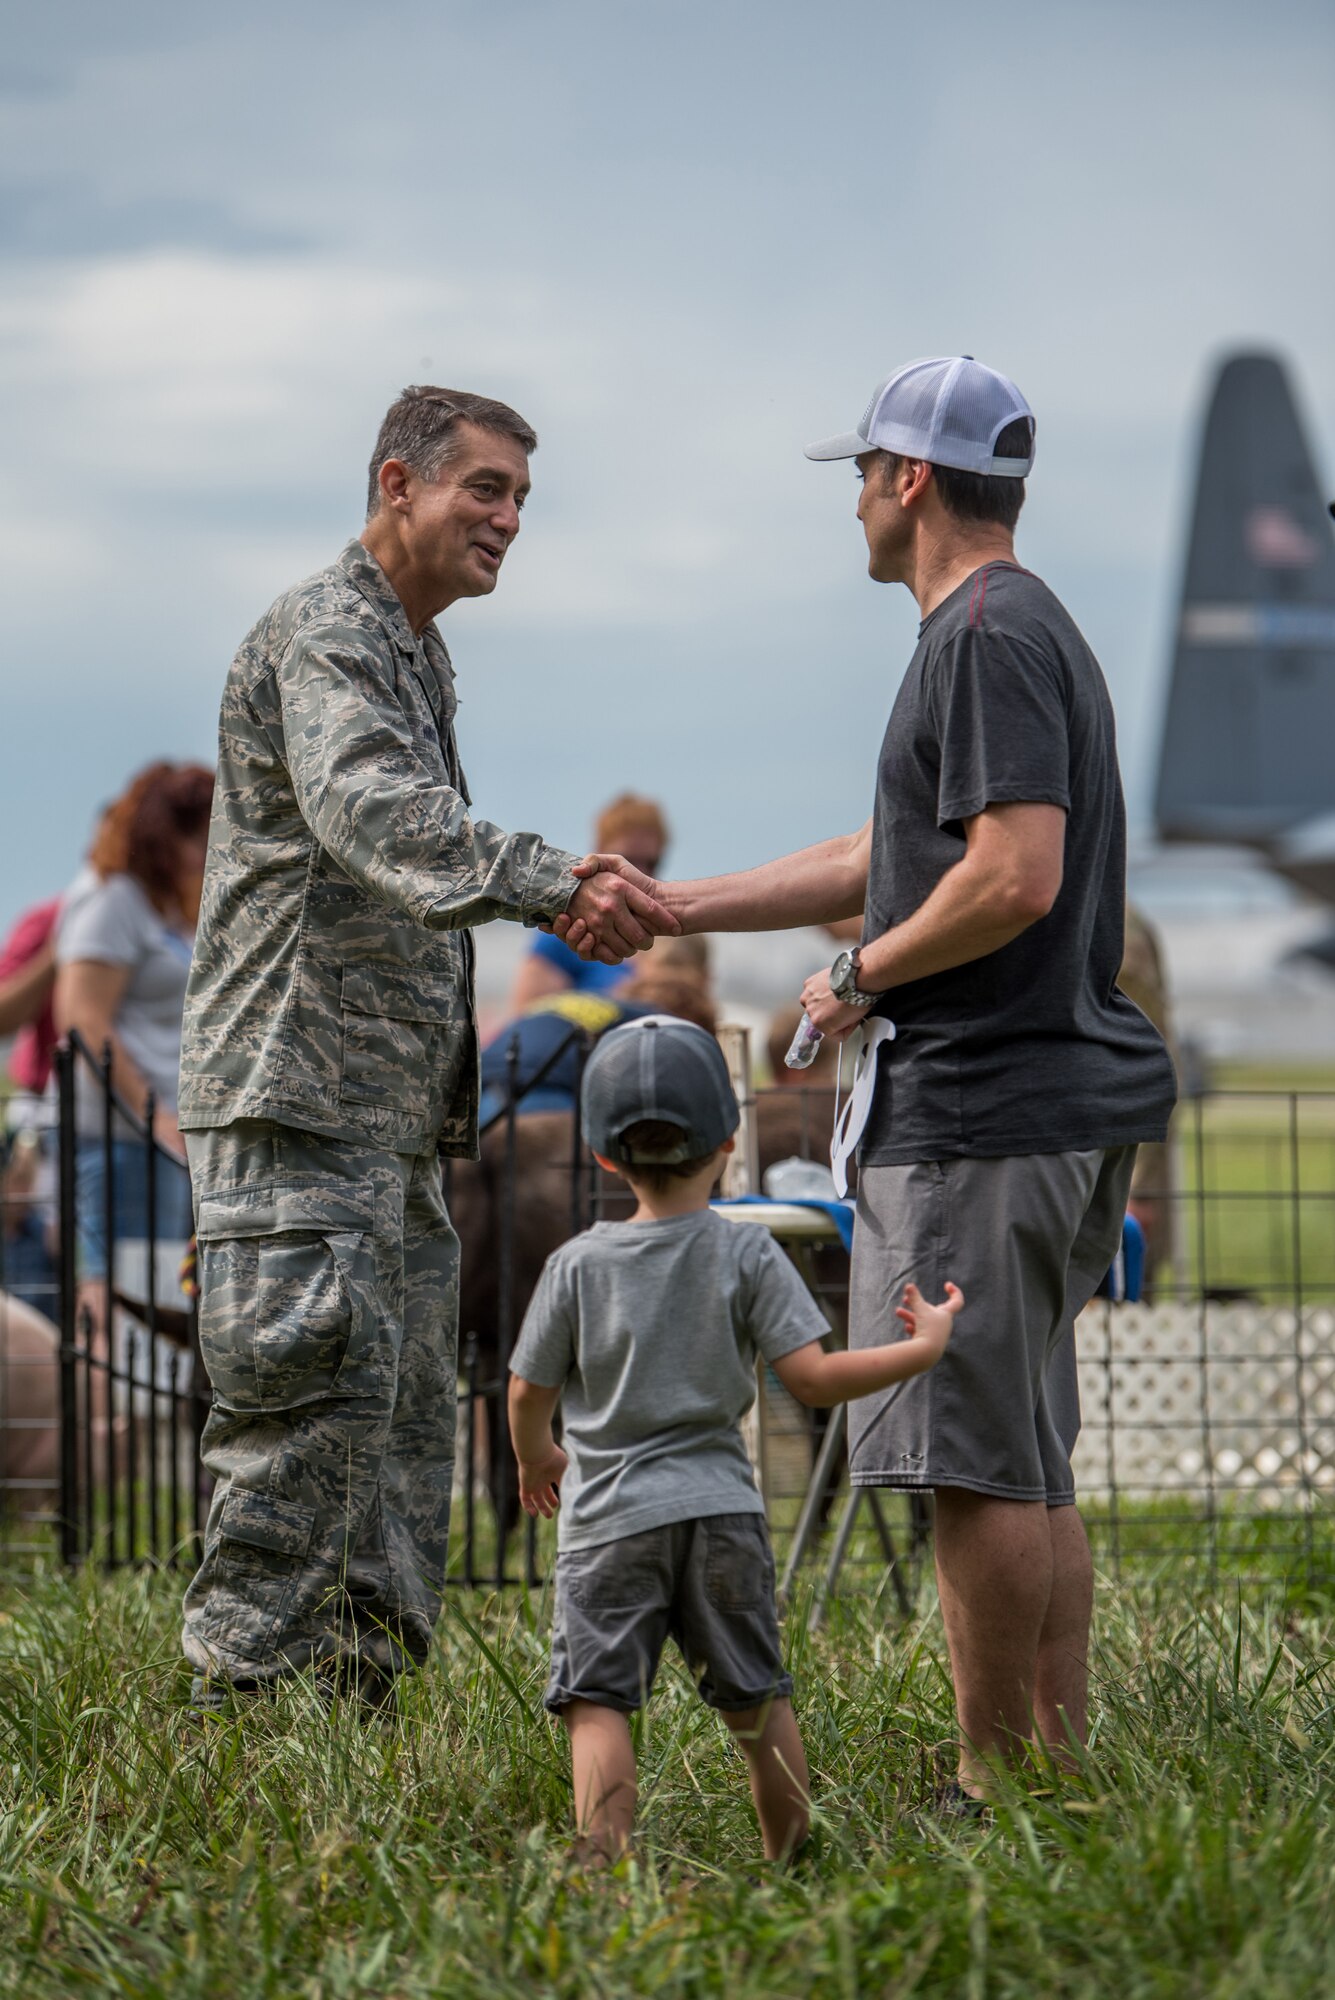 Brig. Gen. Warren Hurst, Kentucky’s assistant adjutant general for Air, greets Airmen and their family members during the 123rd Airlift Wing’s Family Day at the Kentucky Air National Guard Base in Louisville, Ky., Sept. 16, 2018. The event, which was sponsored by the Airman and Family Readiness Office and the Key Volunteer Group, featured a car show, a static-display C-130 Hercules aircraft and several other activities. (U.S. Air National Guard Photo by Staff Sgt. Joshua Horton)